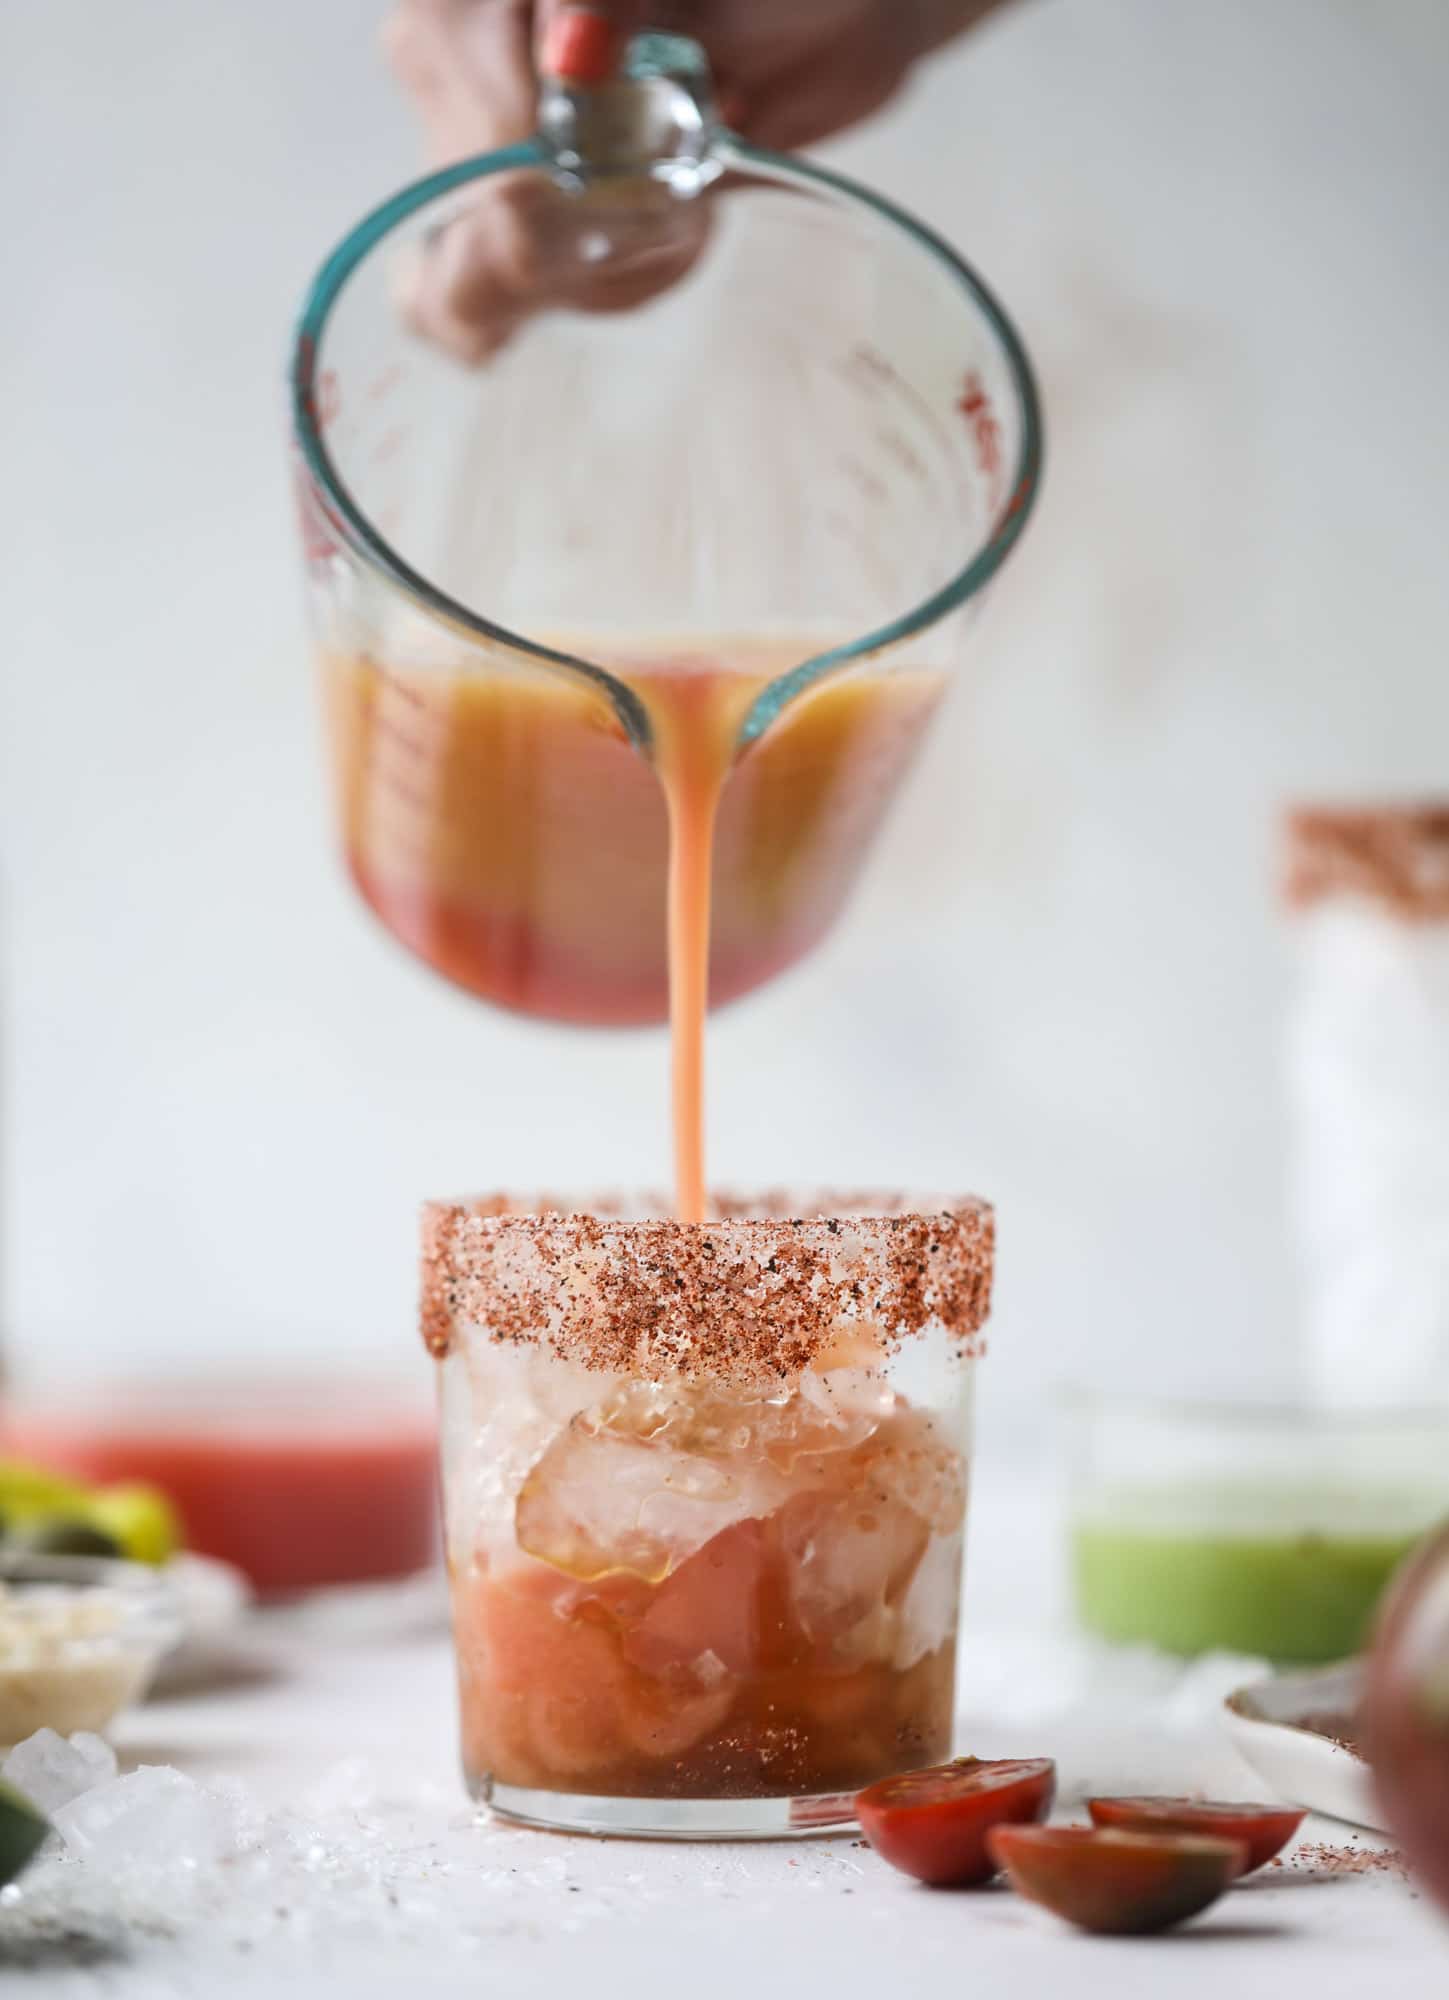 This bloody mary recipe is made with fresh heirloom tomatoes - the gems of summer! The colors swirl together to create a stunning drinking that is loaded with smoky, spicy flavor. Top with your favorite snacks foe the perfect brunch! I howsweeteats.com #bloody #mary #recipe #best #heirloom #tomatoes #cocktail